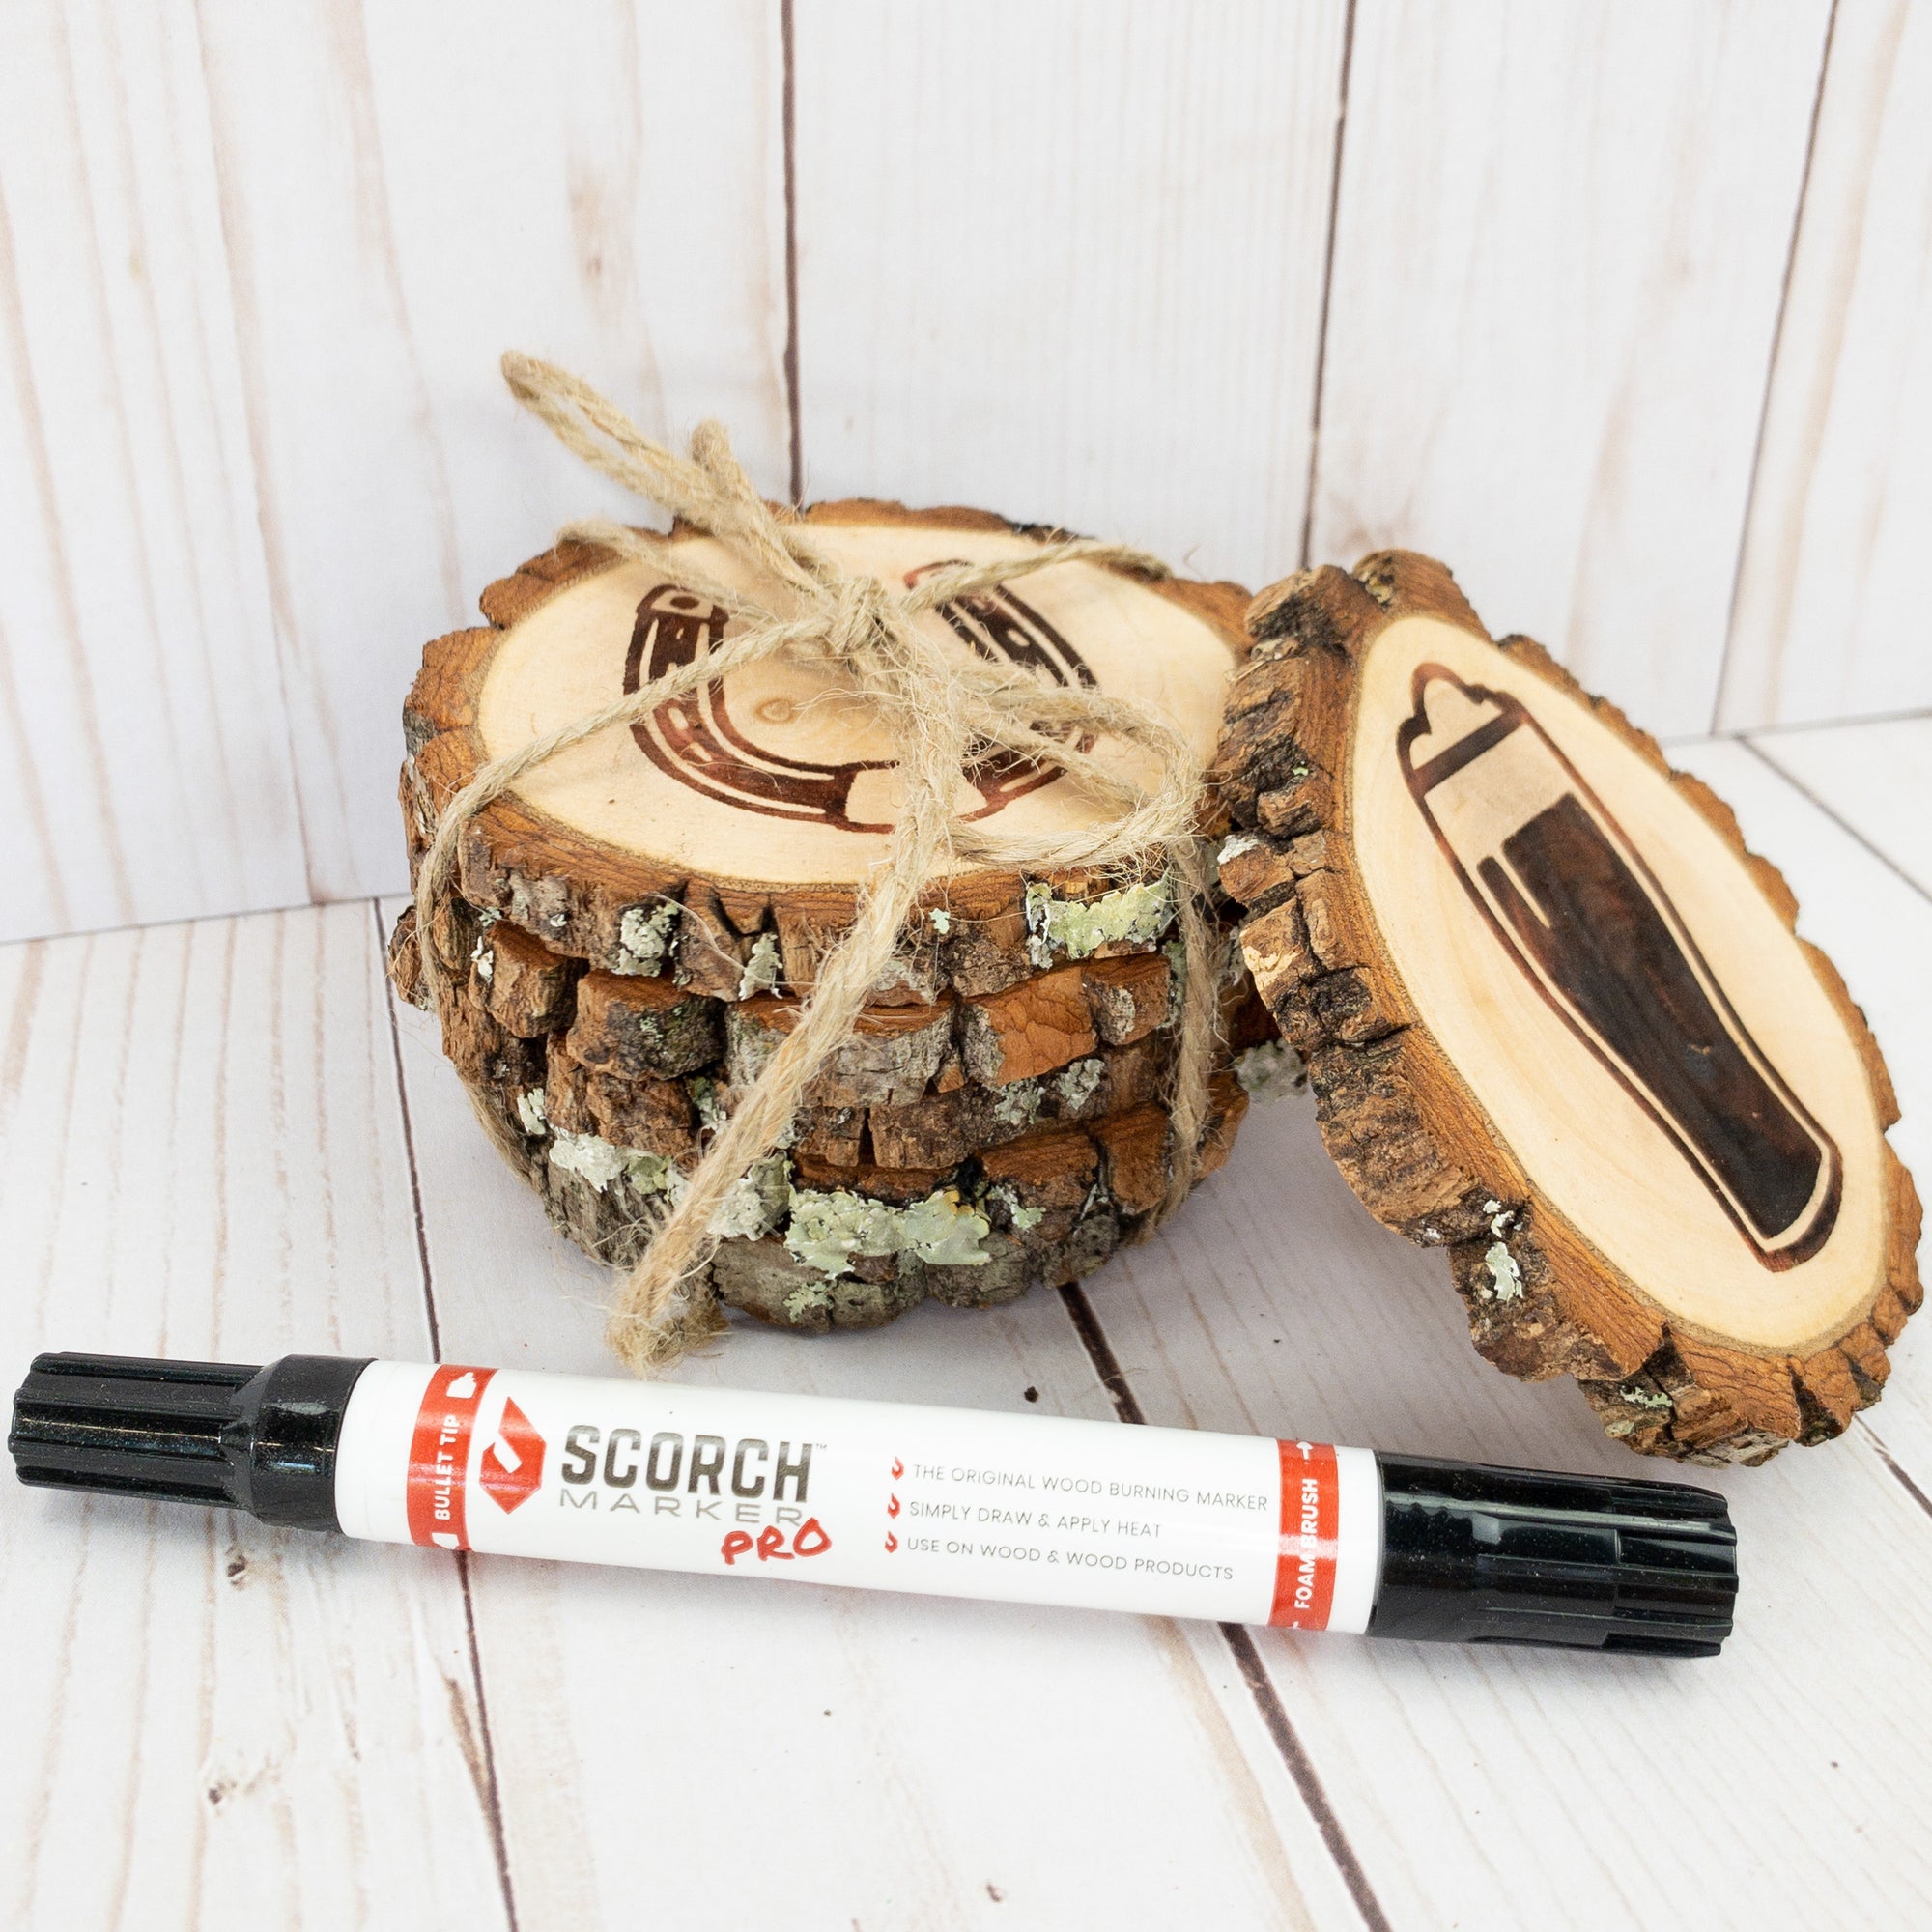 Top Wood Burning Tips for the Whole Family - Scorch Marker